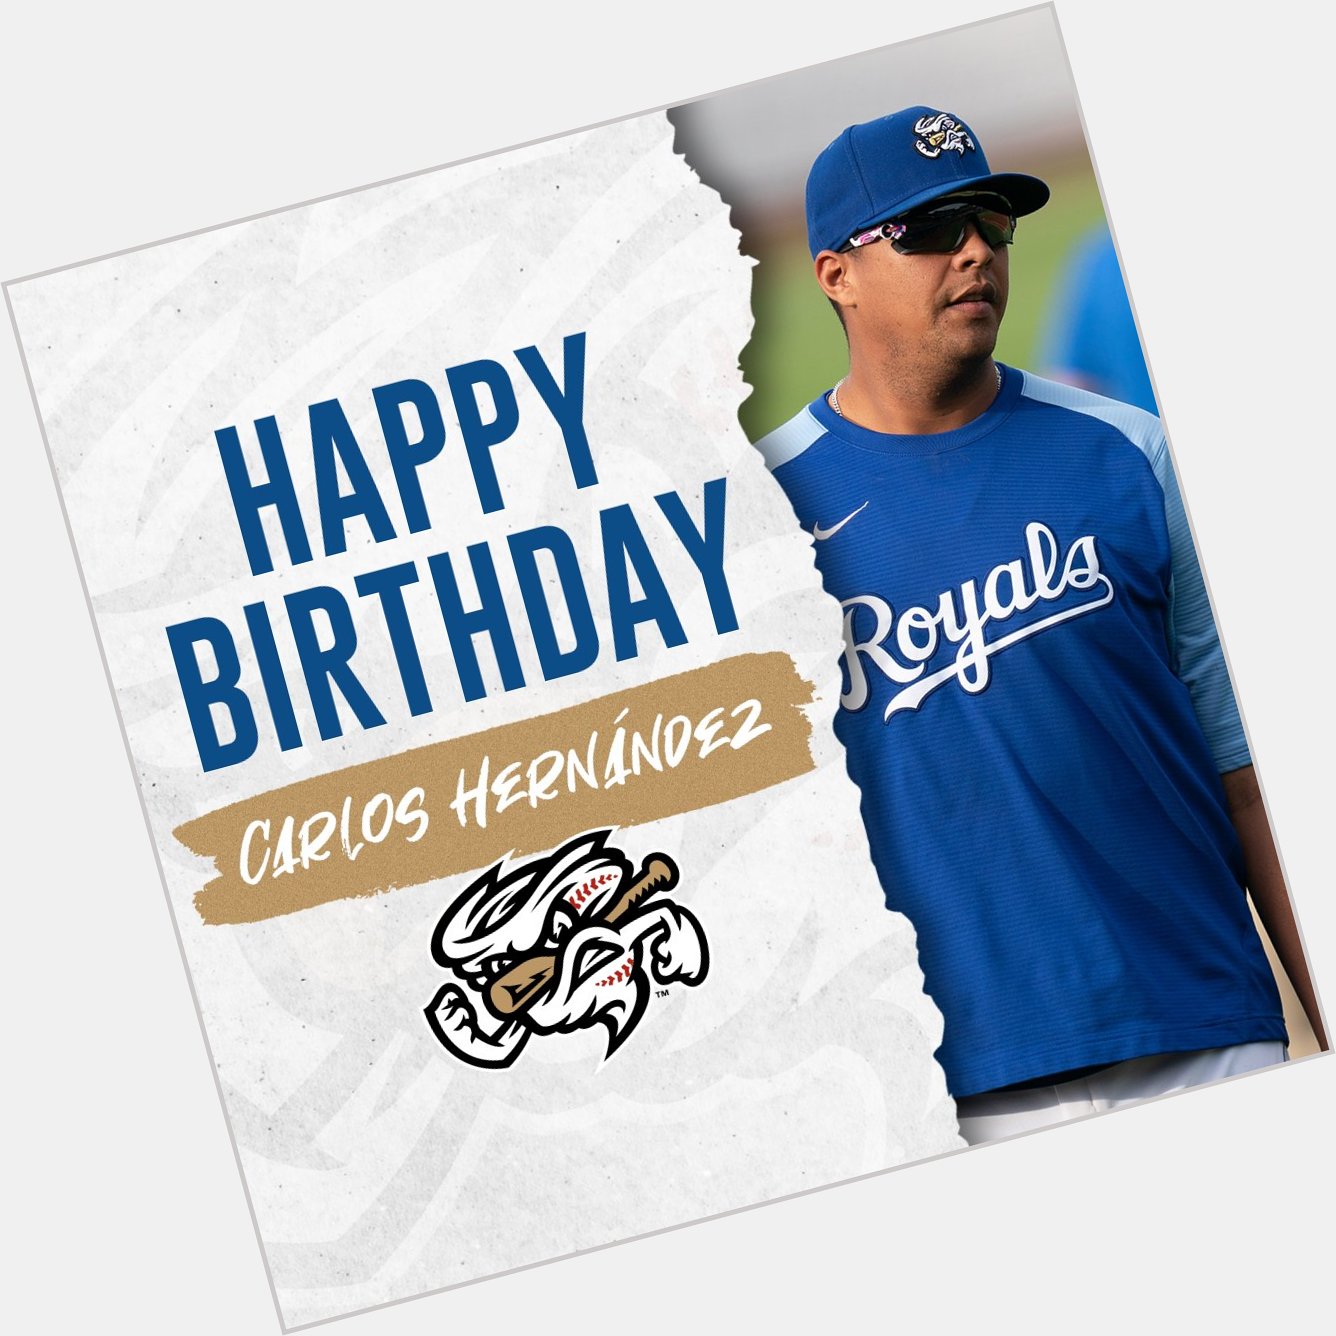 Join us in wishing Carlos Hernández a happy birthday  